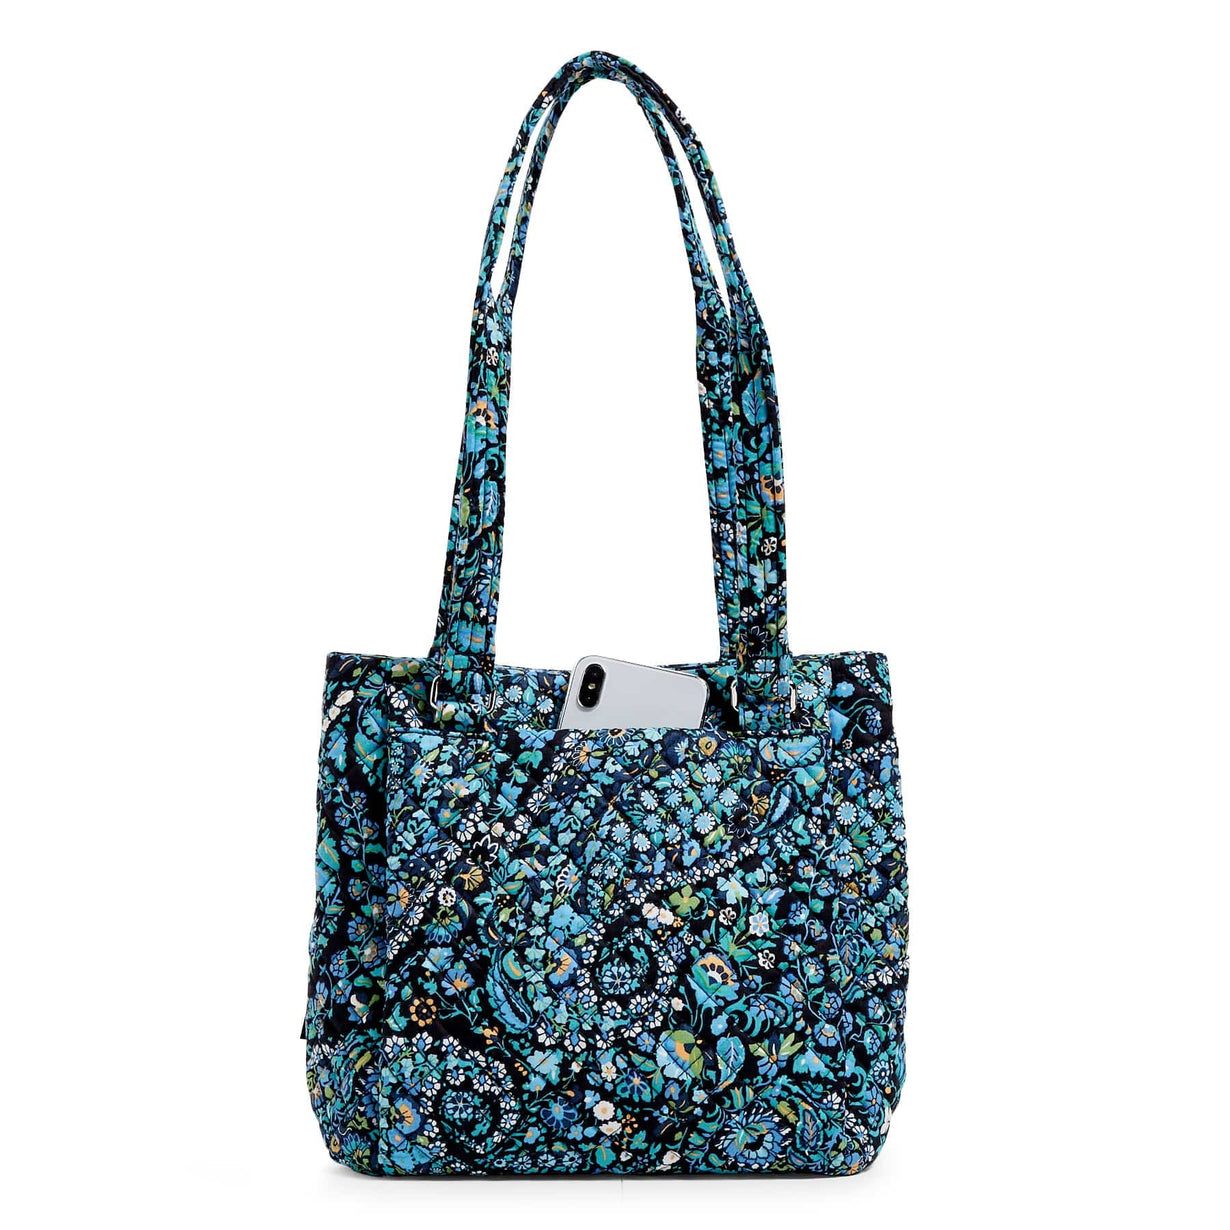 Women's Tote Bags, Shop Exclusive Styles